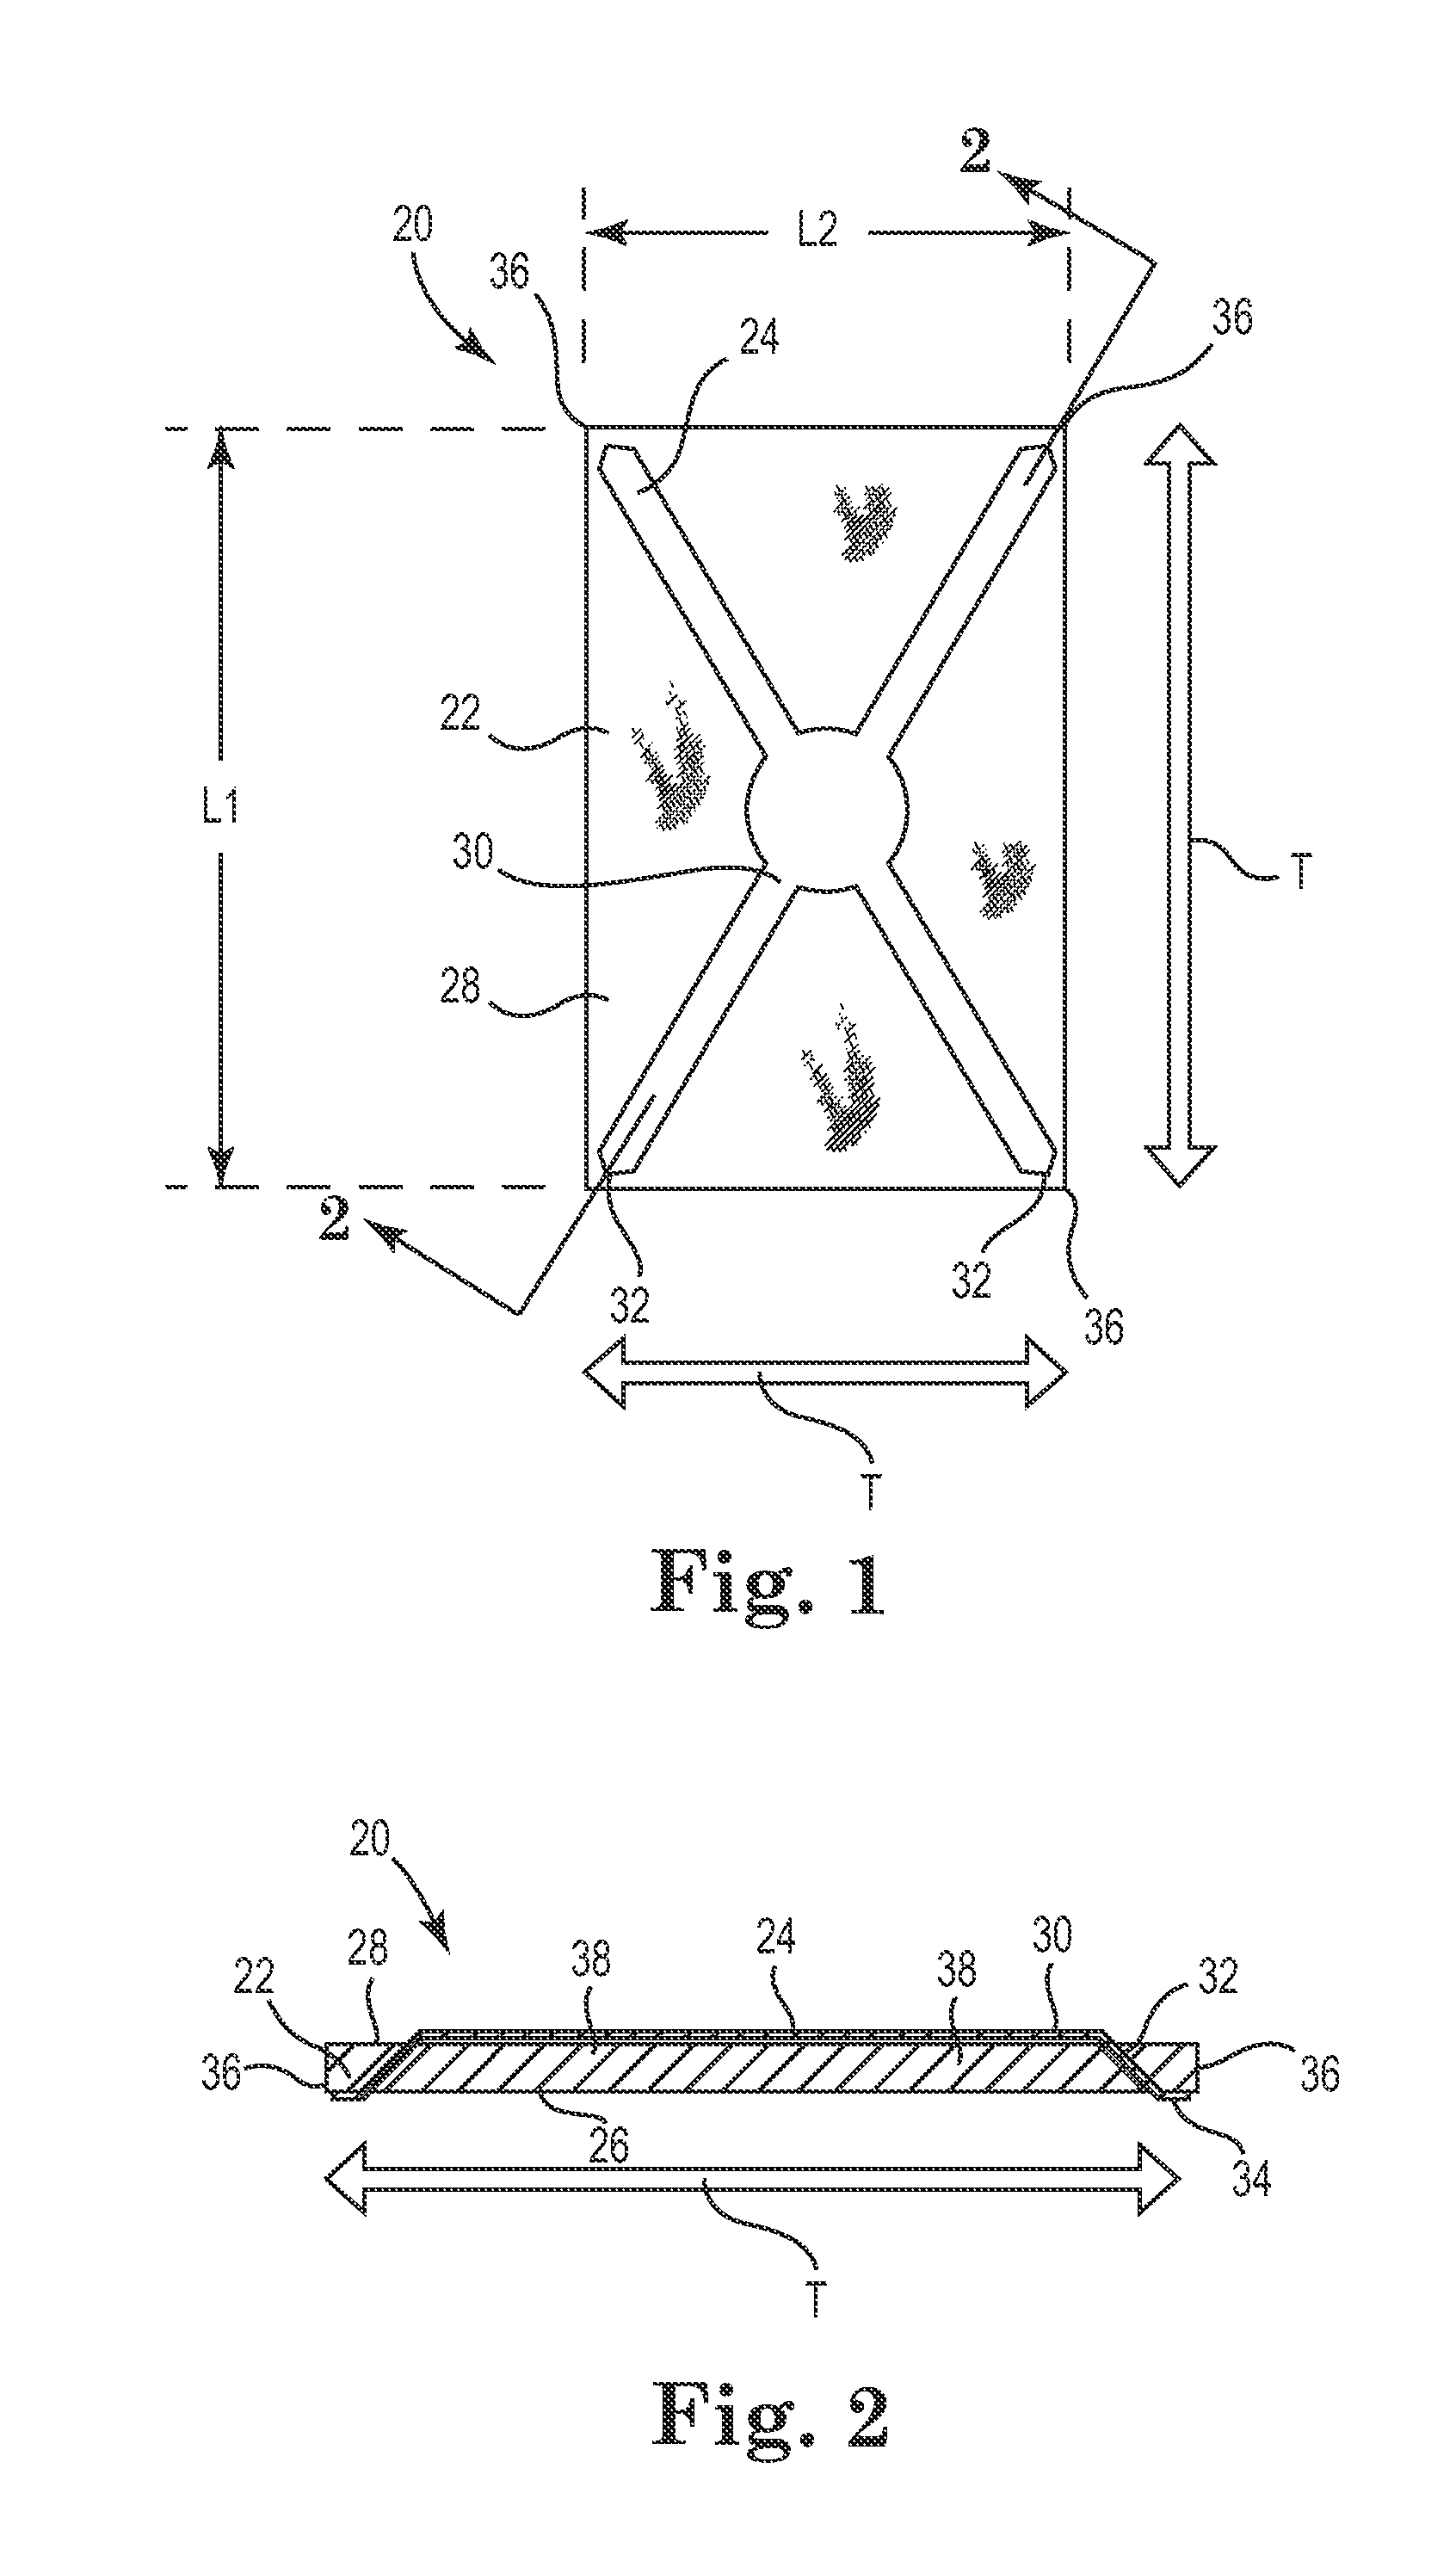 Method of implanting a fabric to repair a pelvic floor